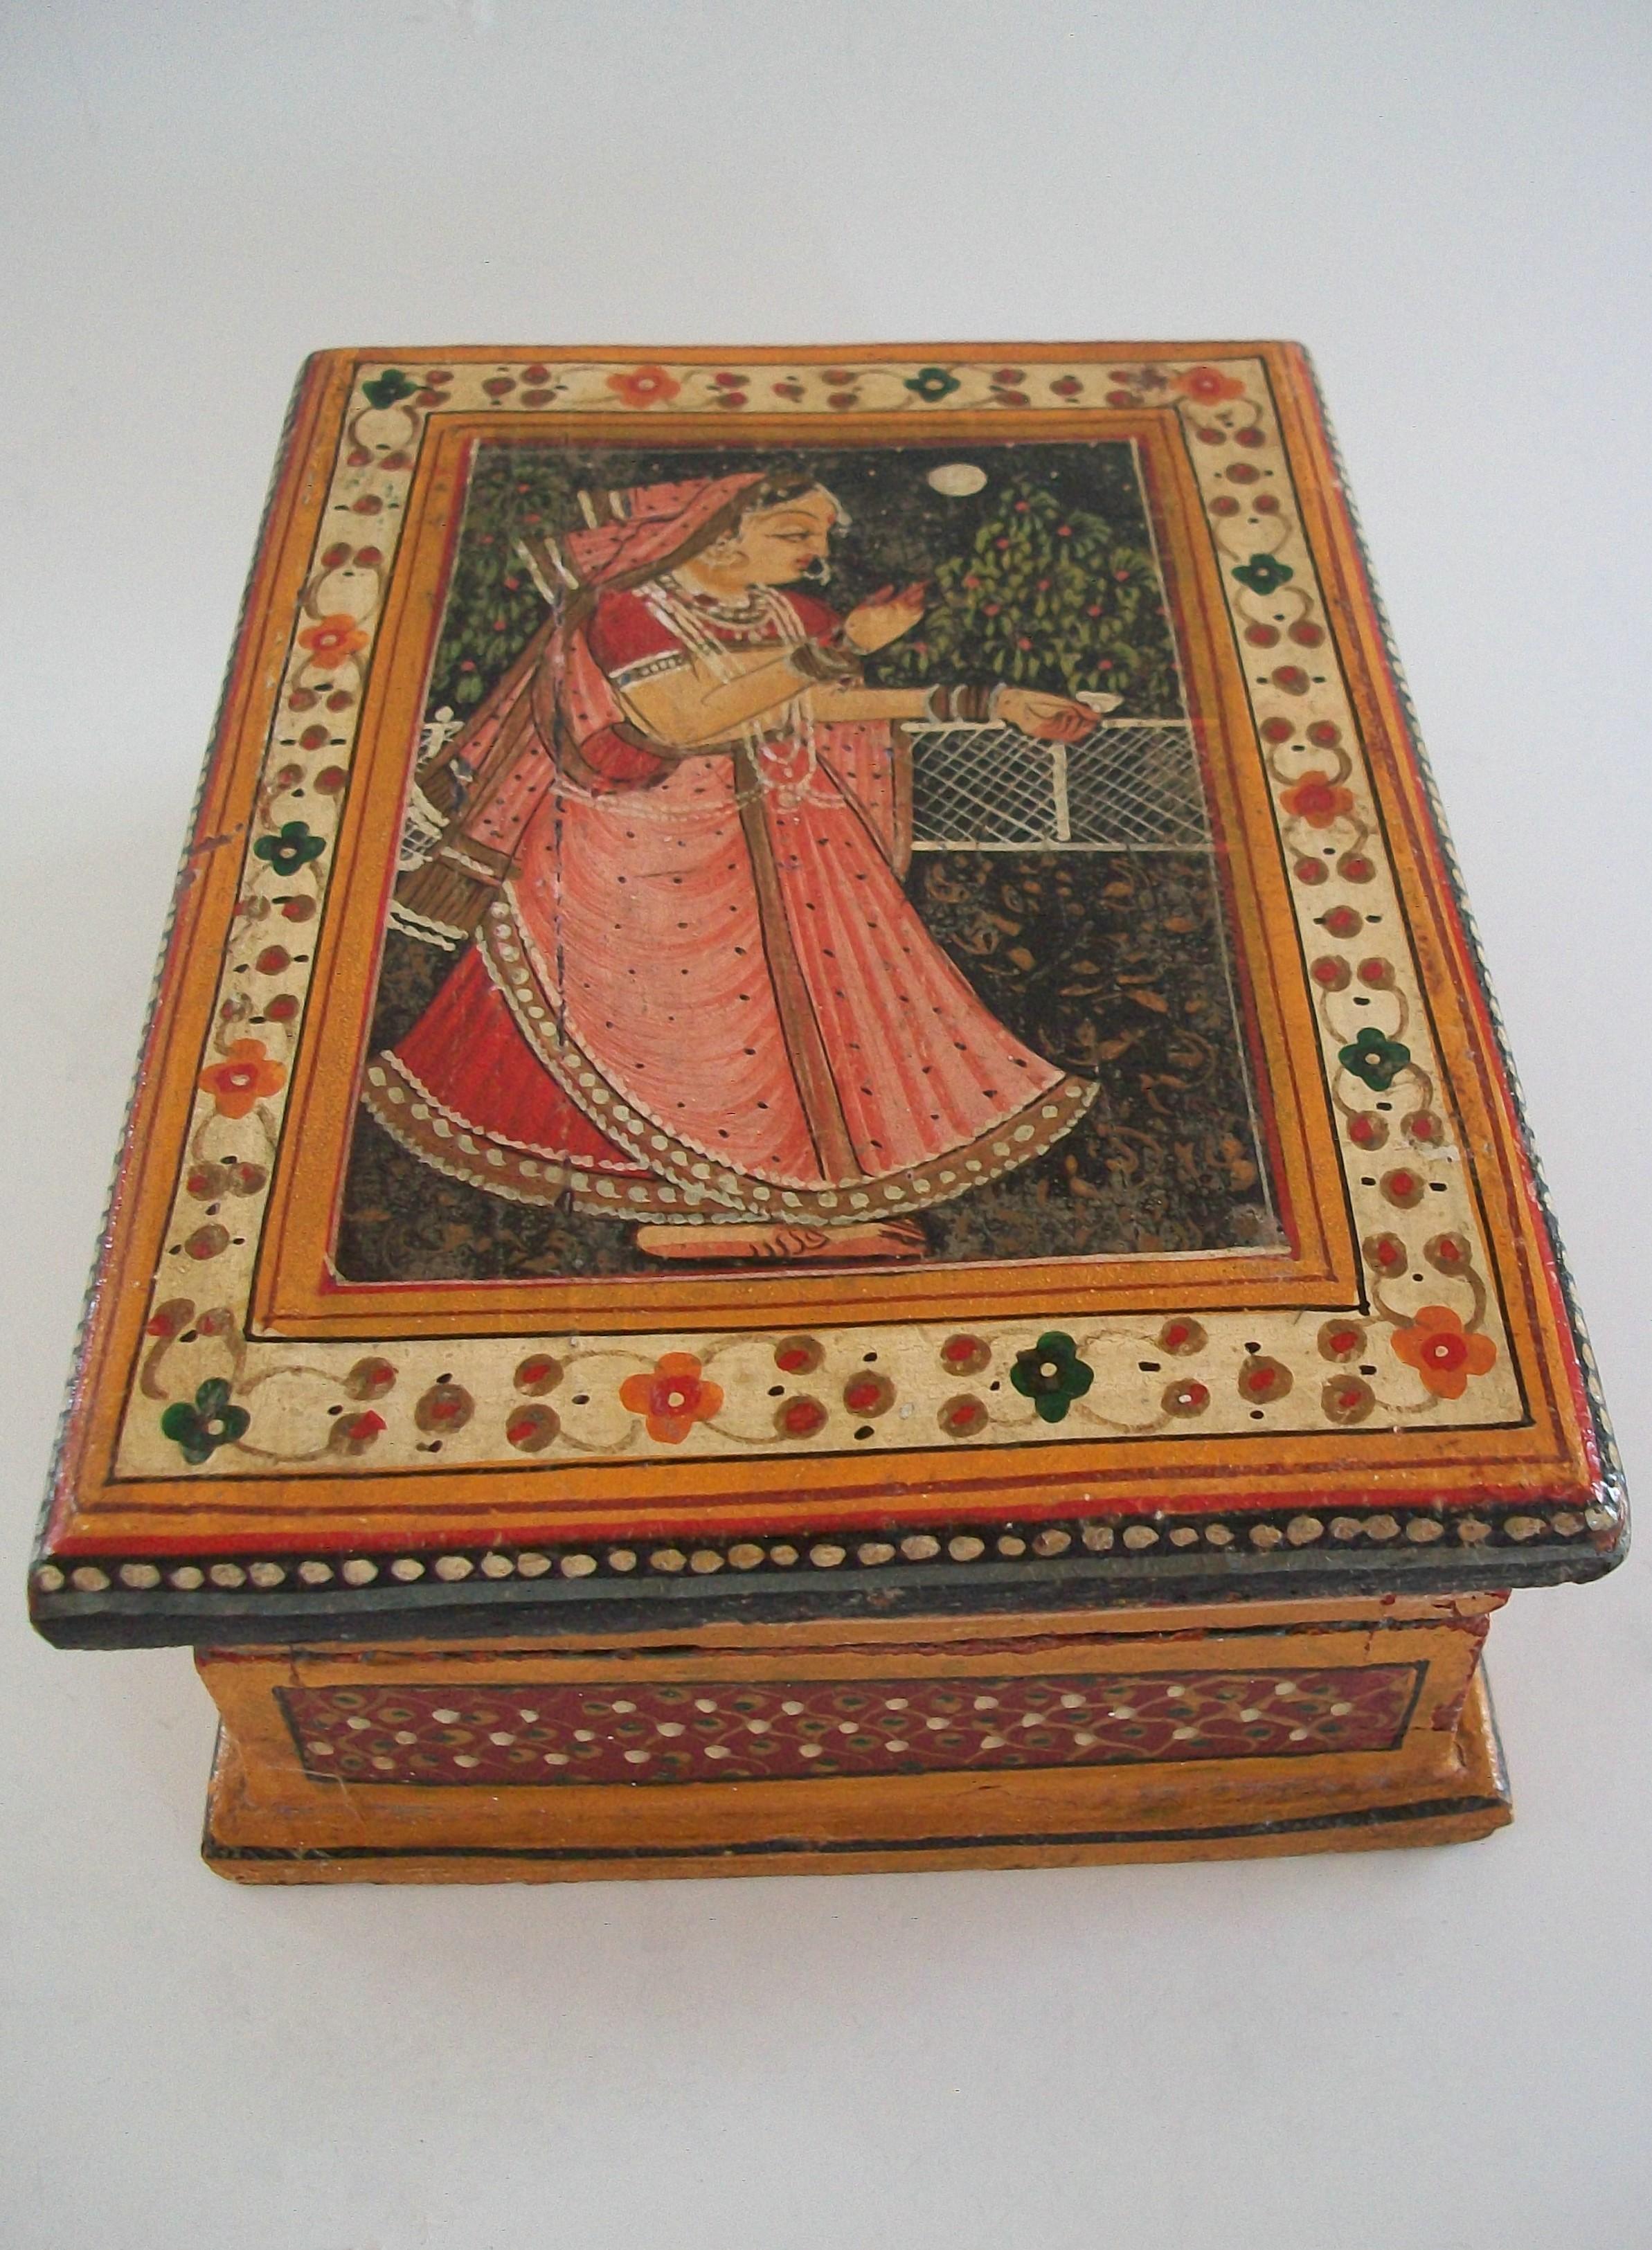 Hand-Crafted Vintage South Asian Folk Art Hand Painted Wooden Box - India - Mid 20th Century For Sale